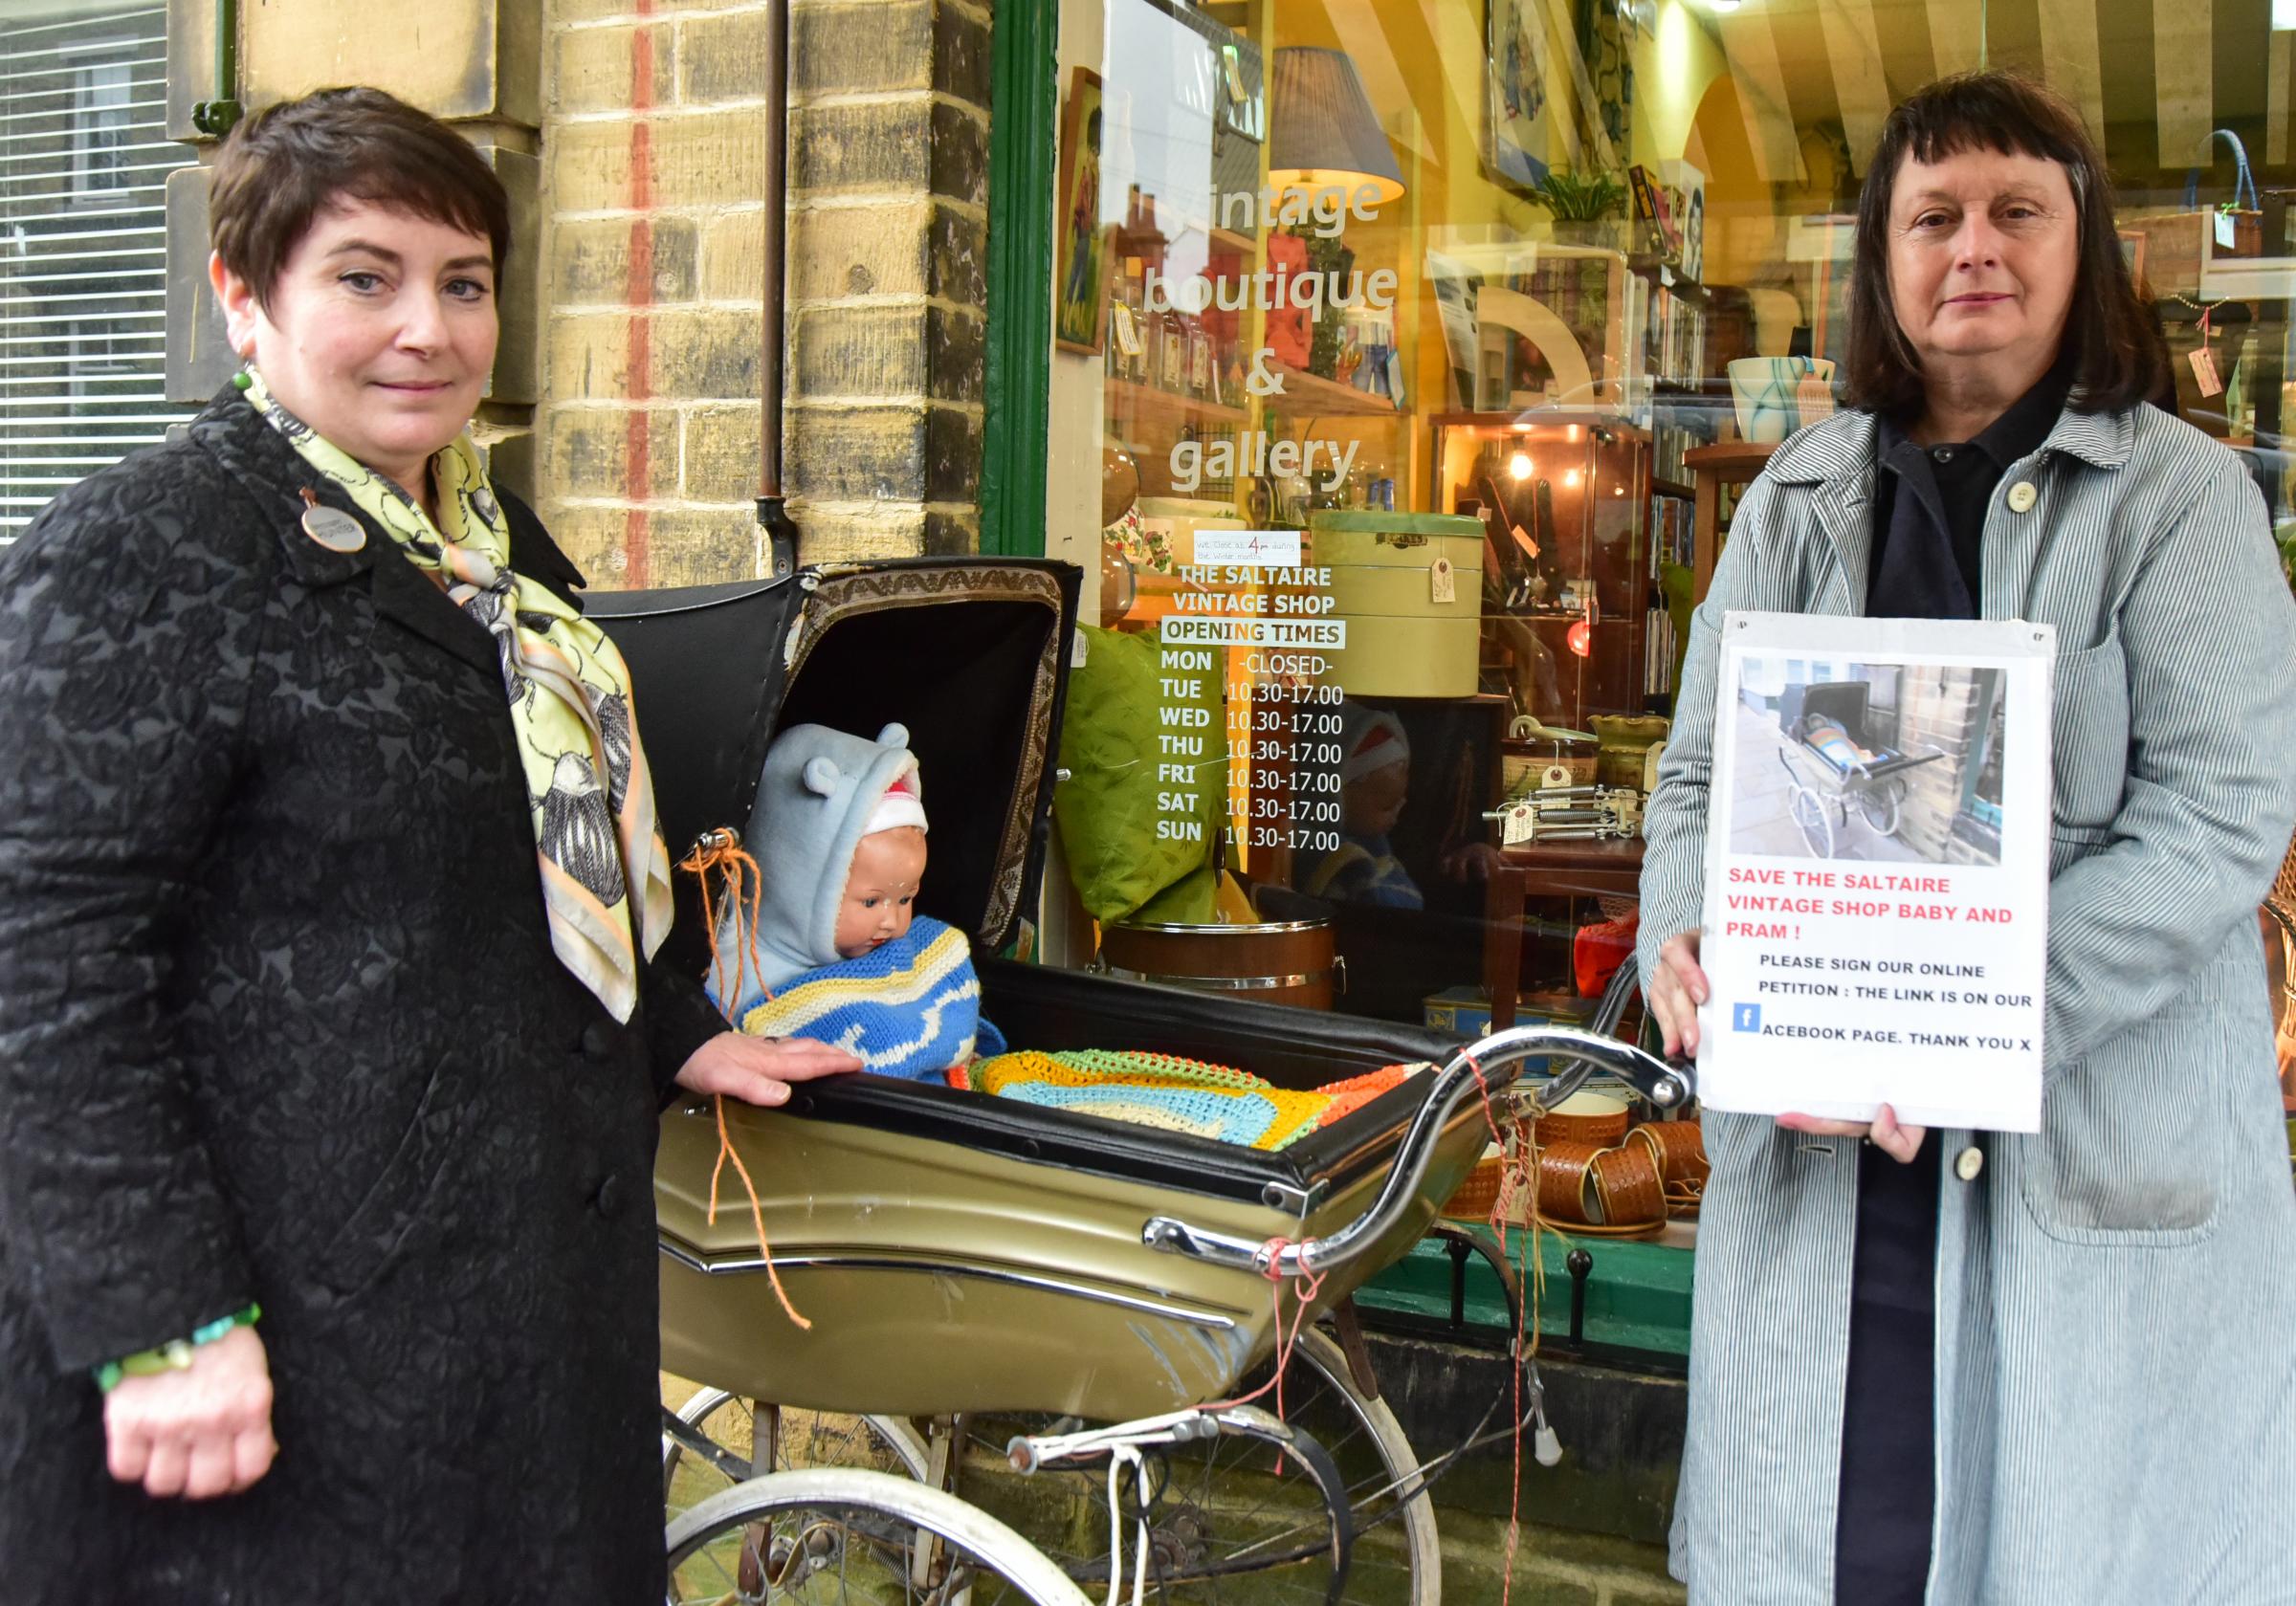 Shop owners told vintage pram display is causing an obstruction and has to go